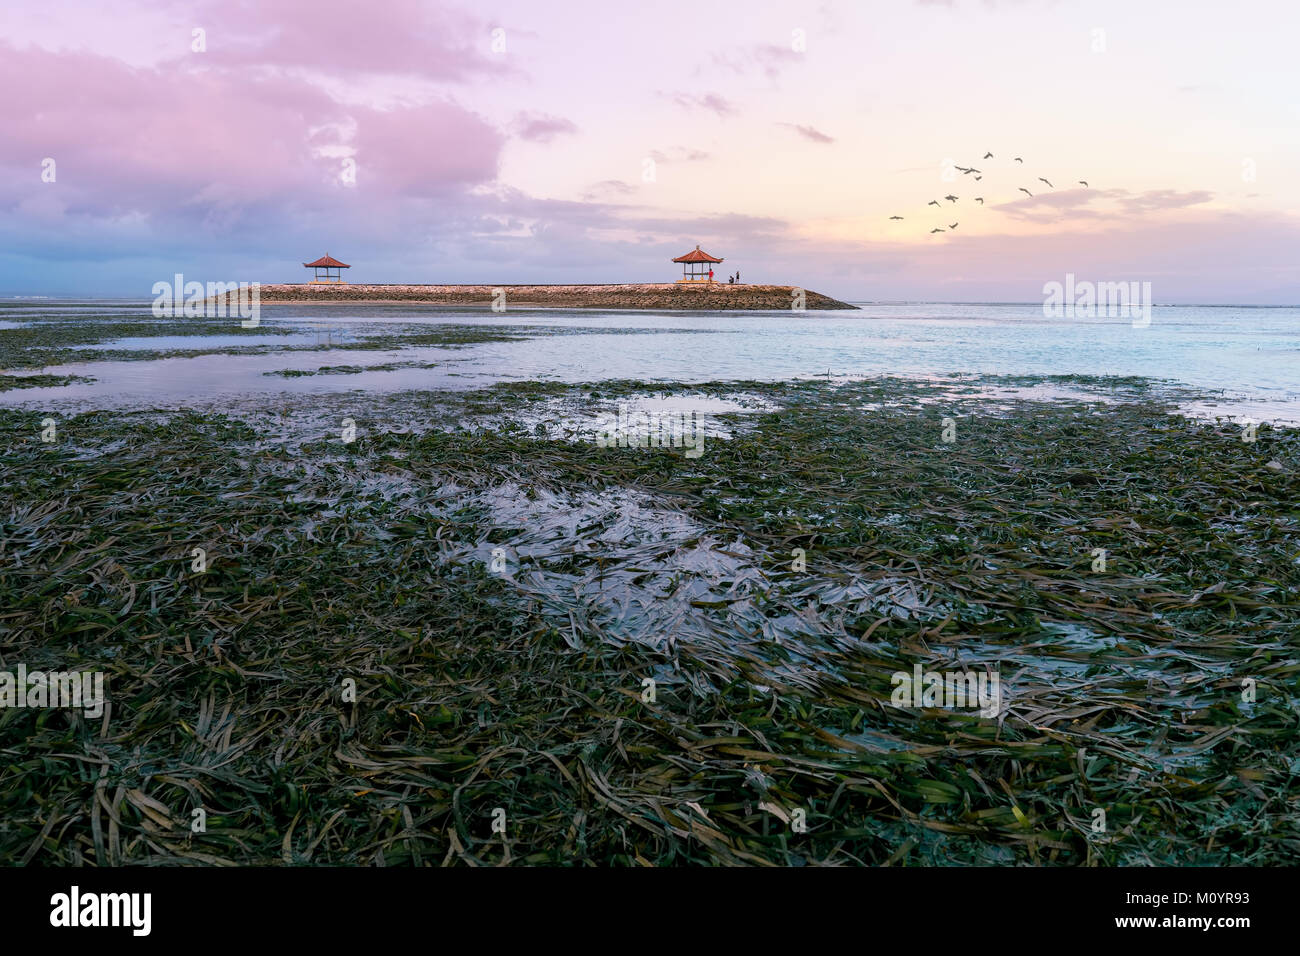 Gazebo in the middle on sea in low tide during sunset or sunrise with bird flying in the sky Stock Photo